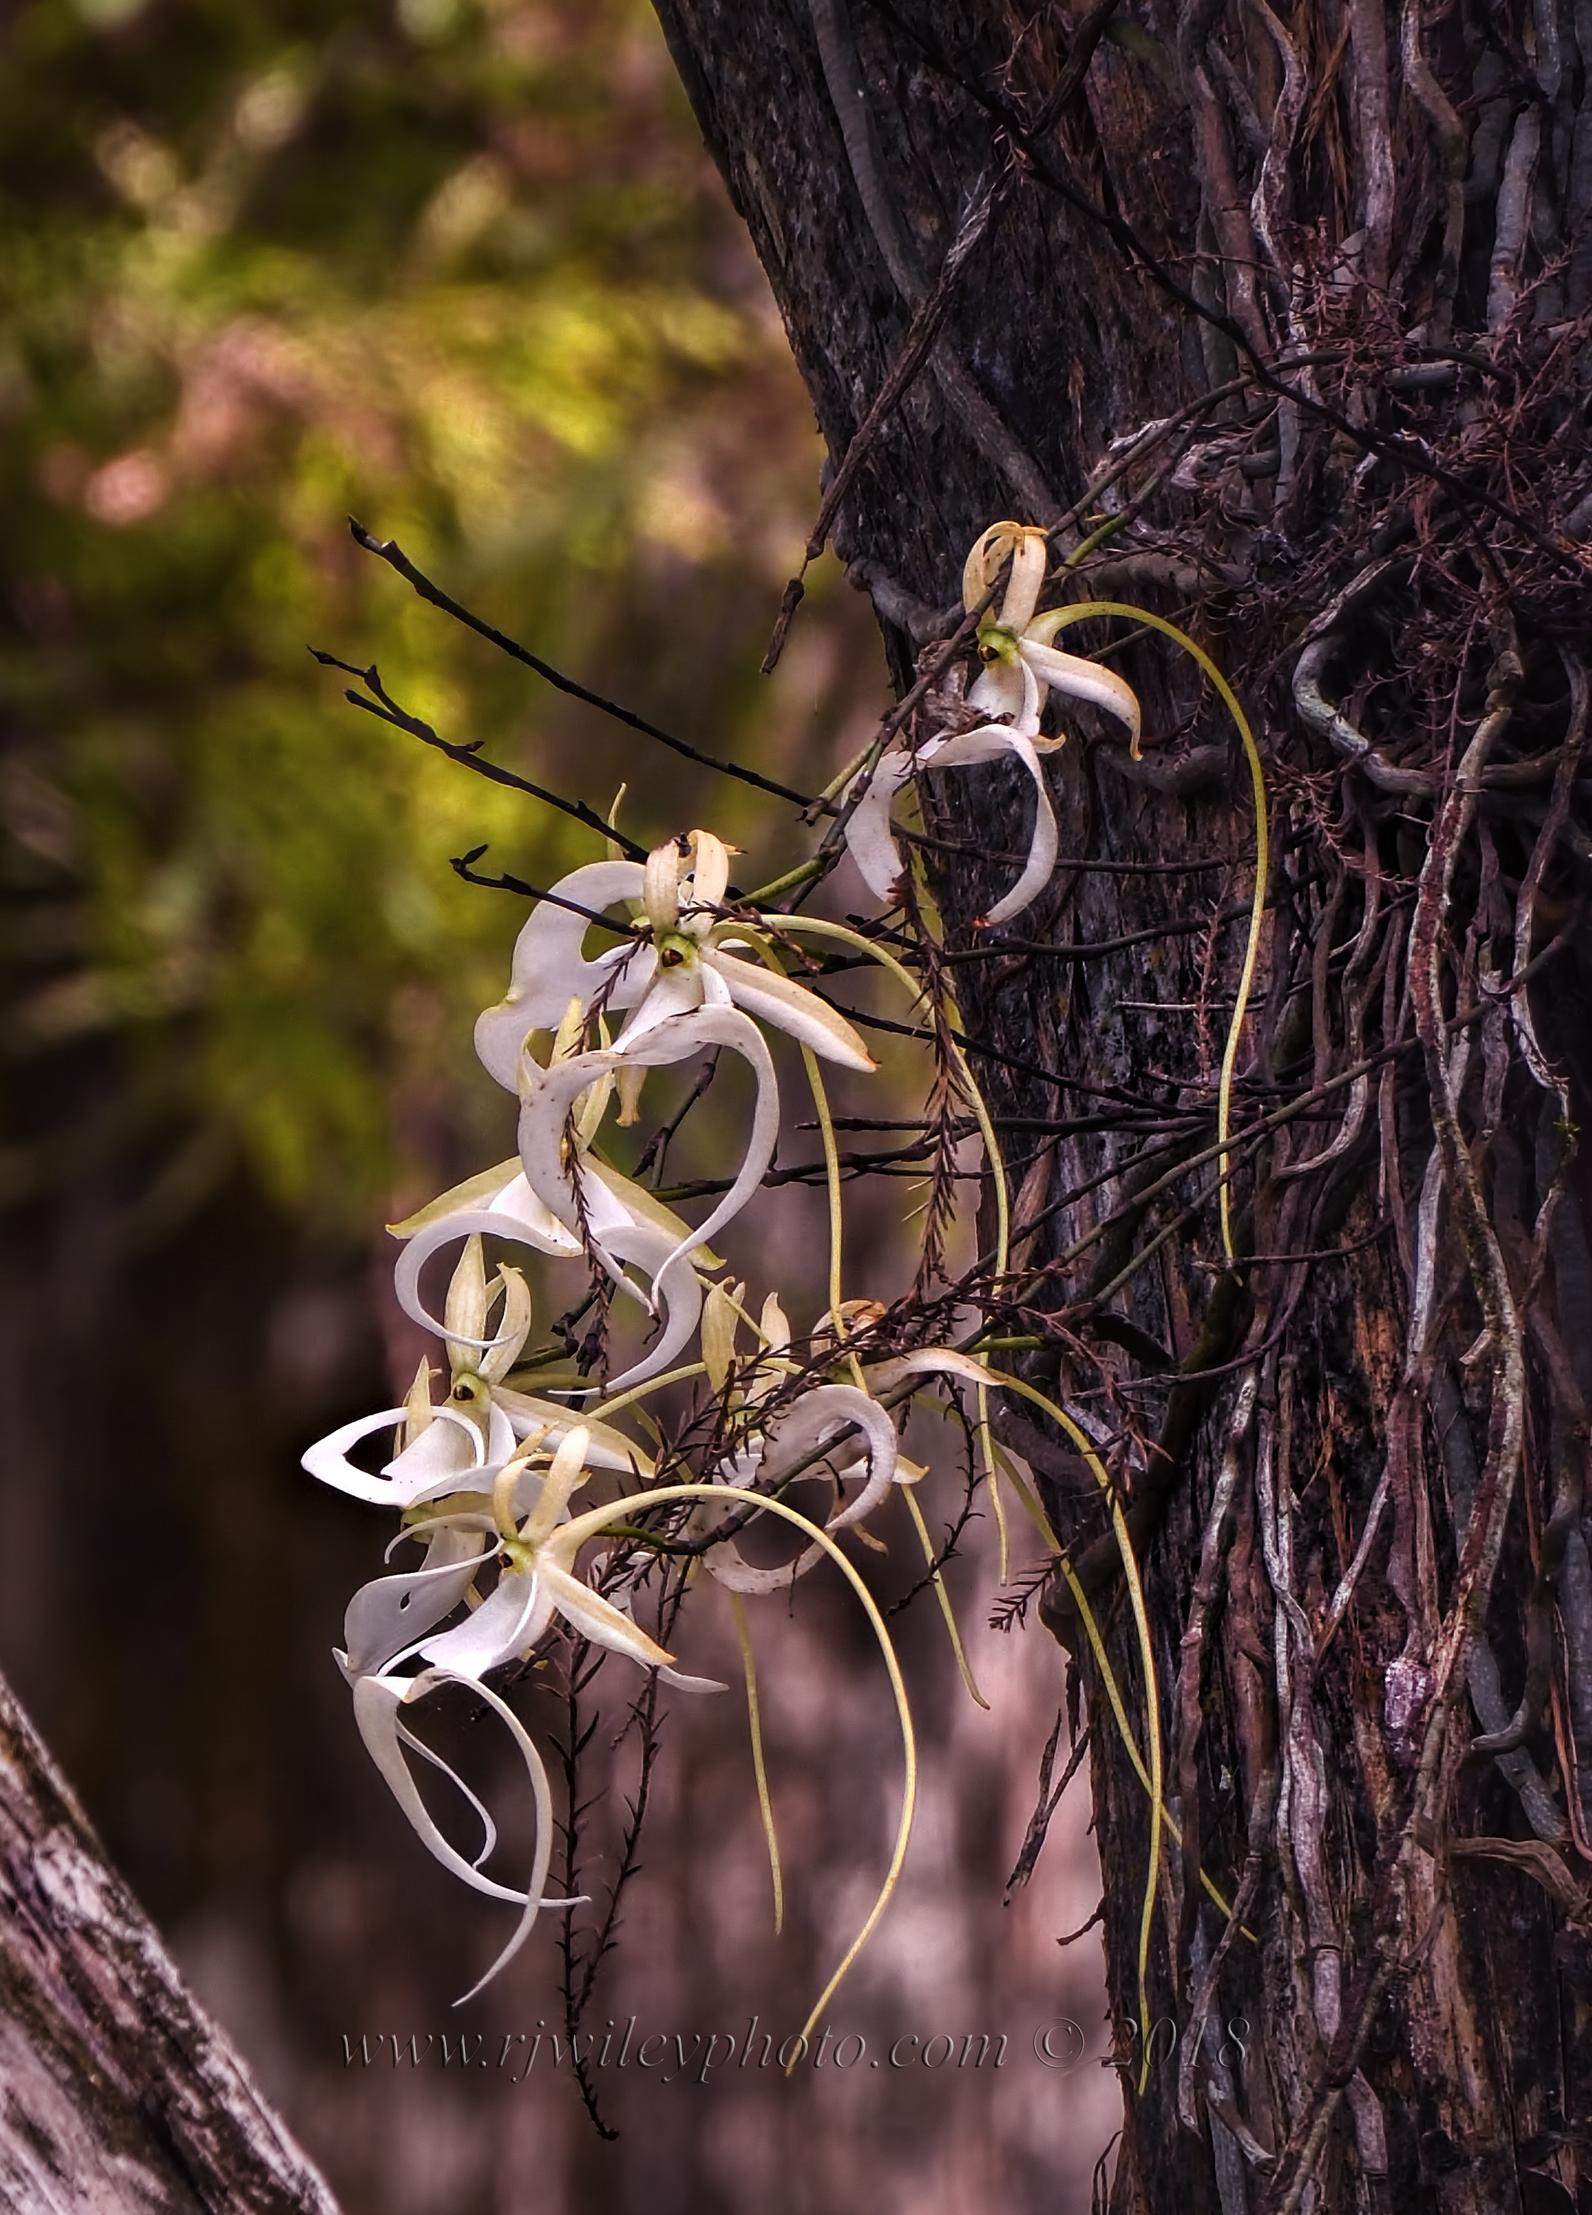 9 blooms on the 'Super' Ghost Orchid in September 2018